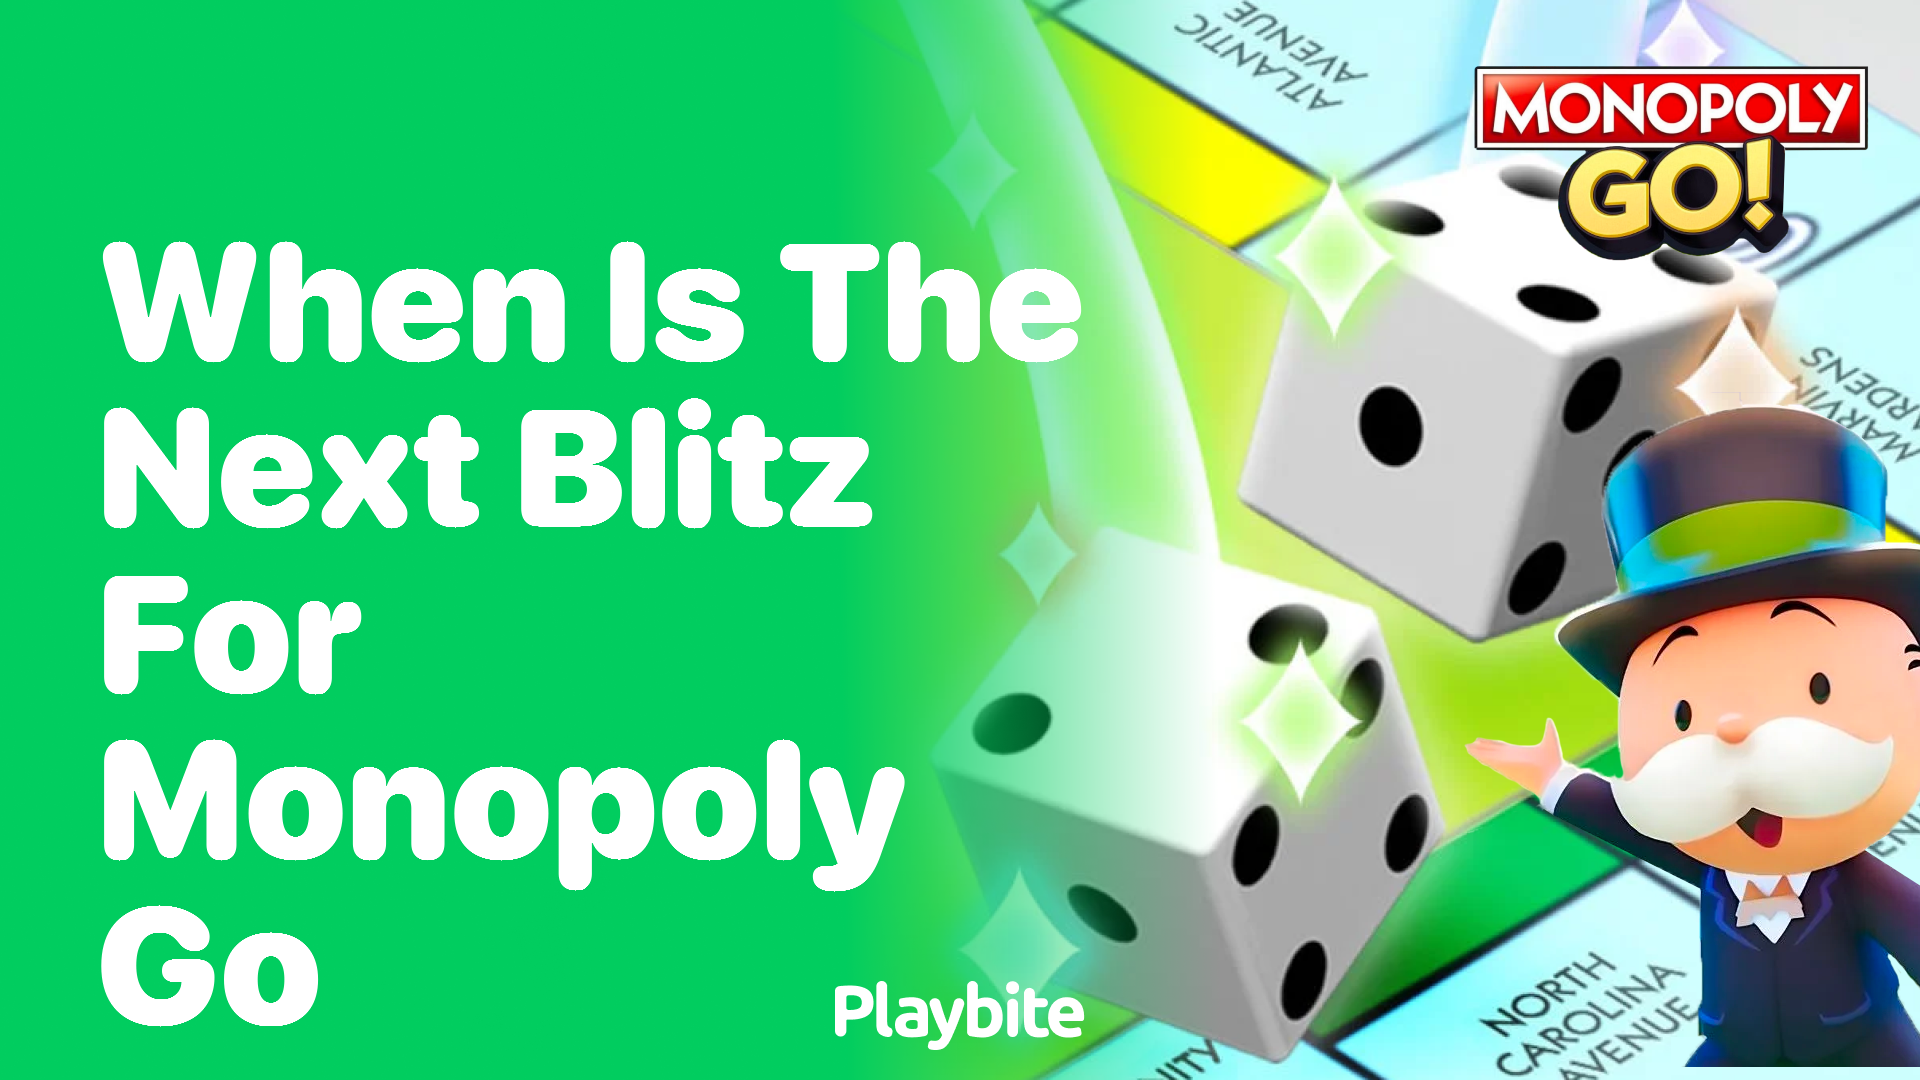 When Is the Next Blitz for Monopoly Go?